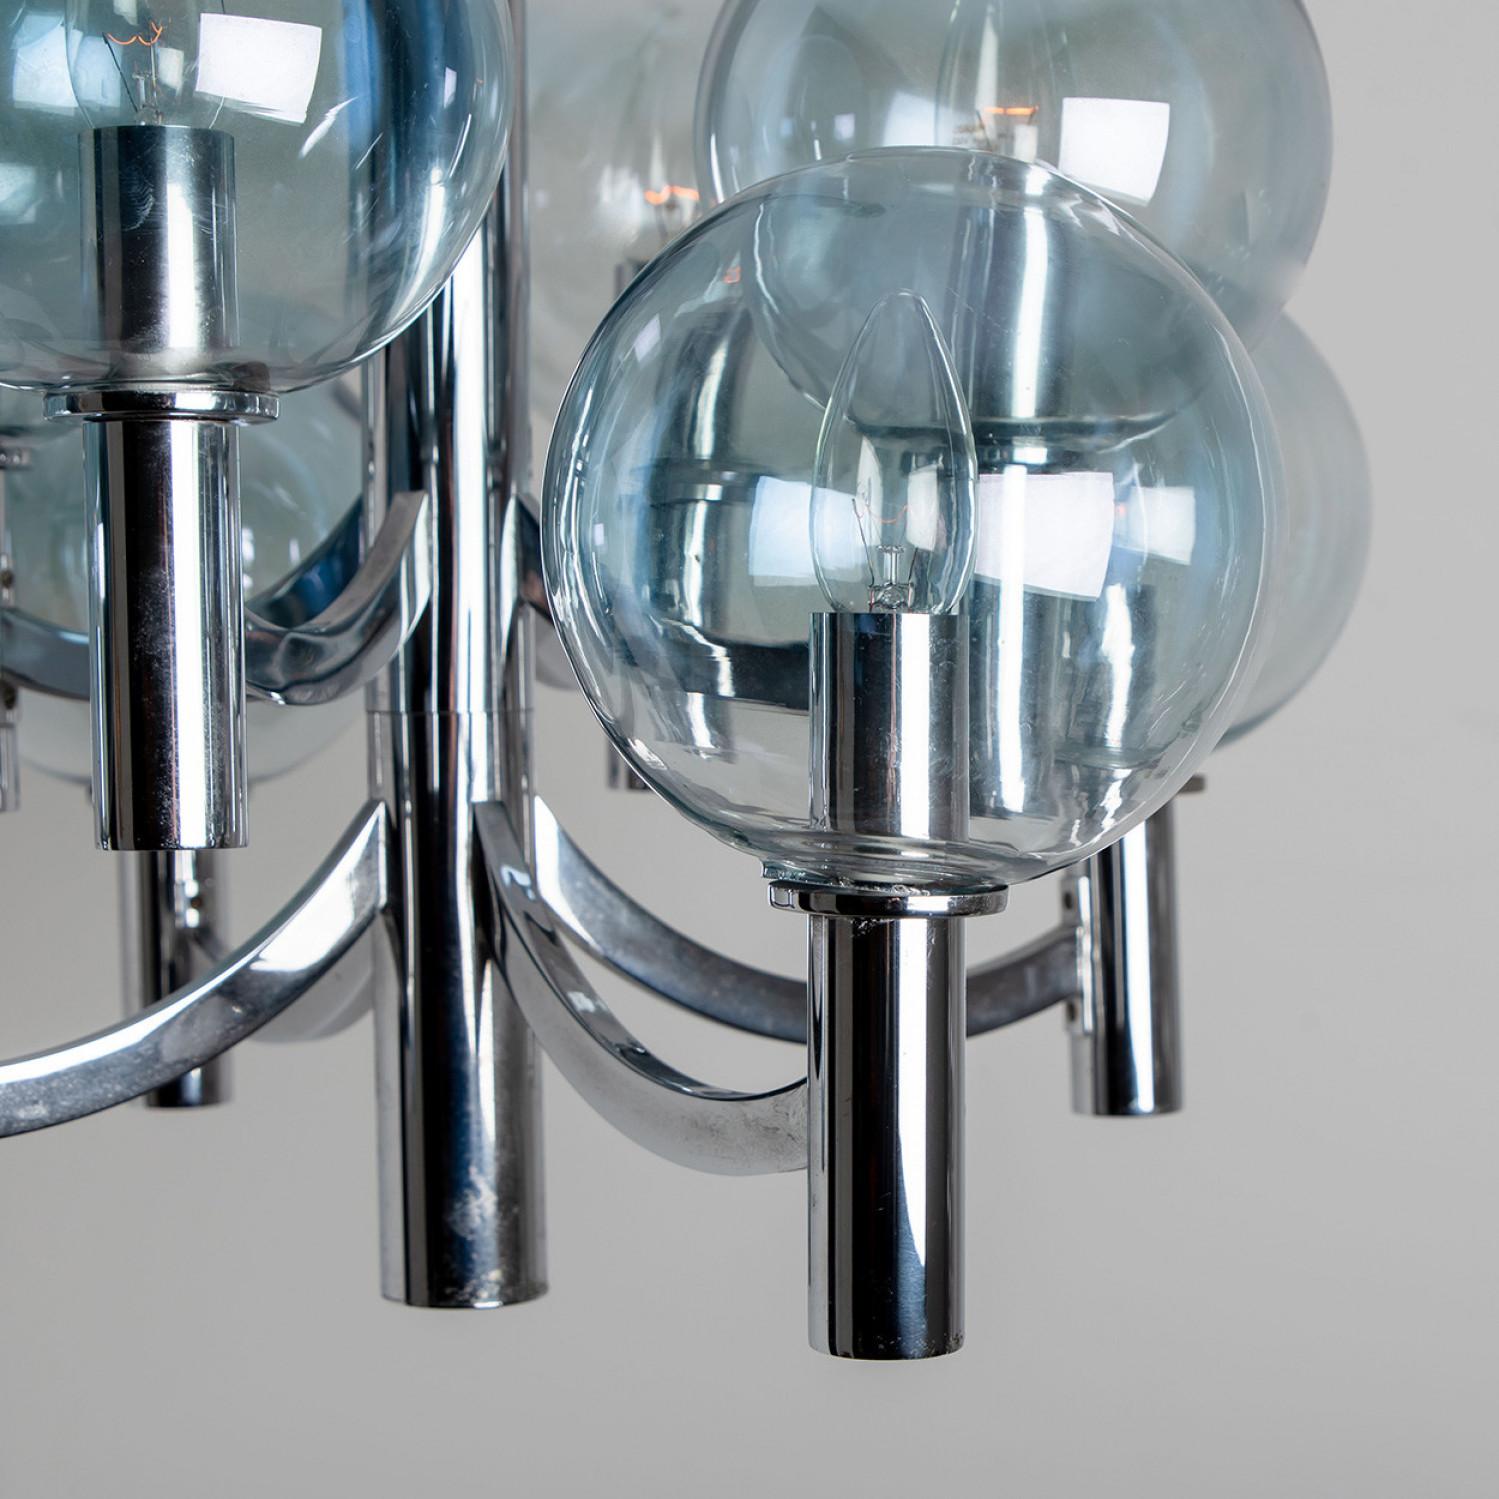 Mid-Century Modern Chrome and Light Blue Glass Chandelier in the style of Arne Jakobsson, 1970s For Sale